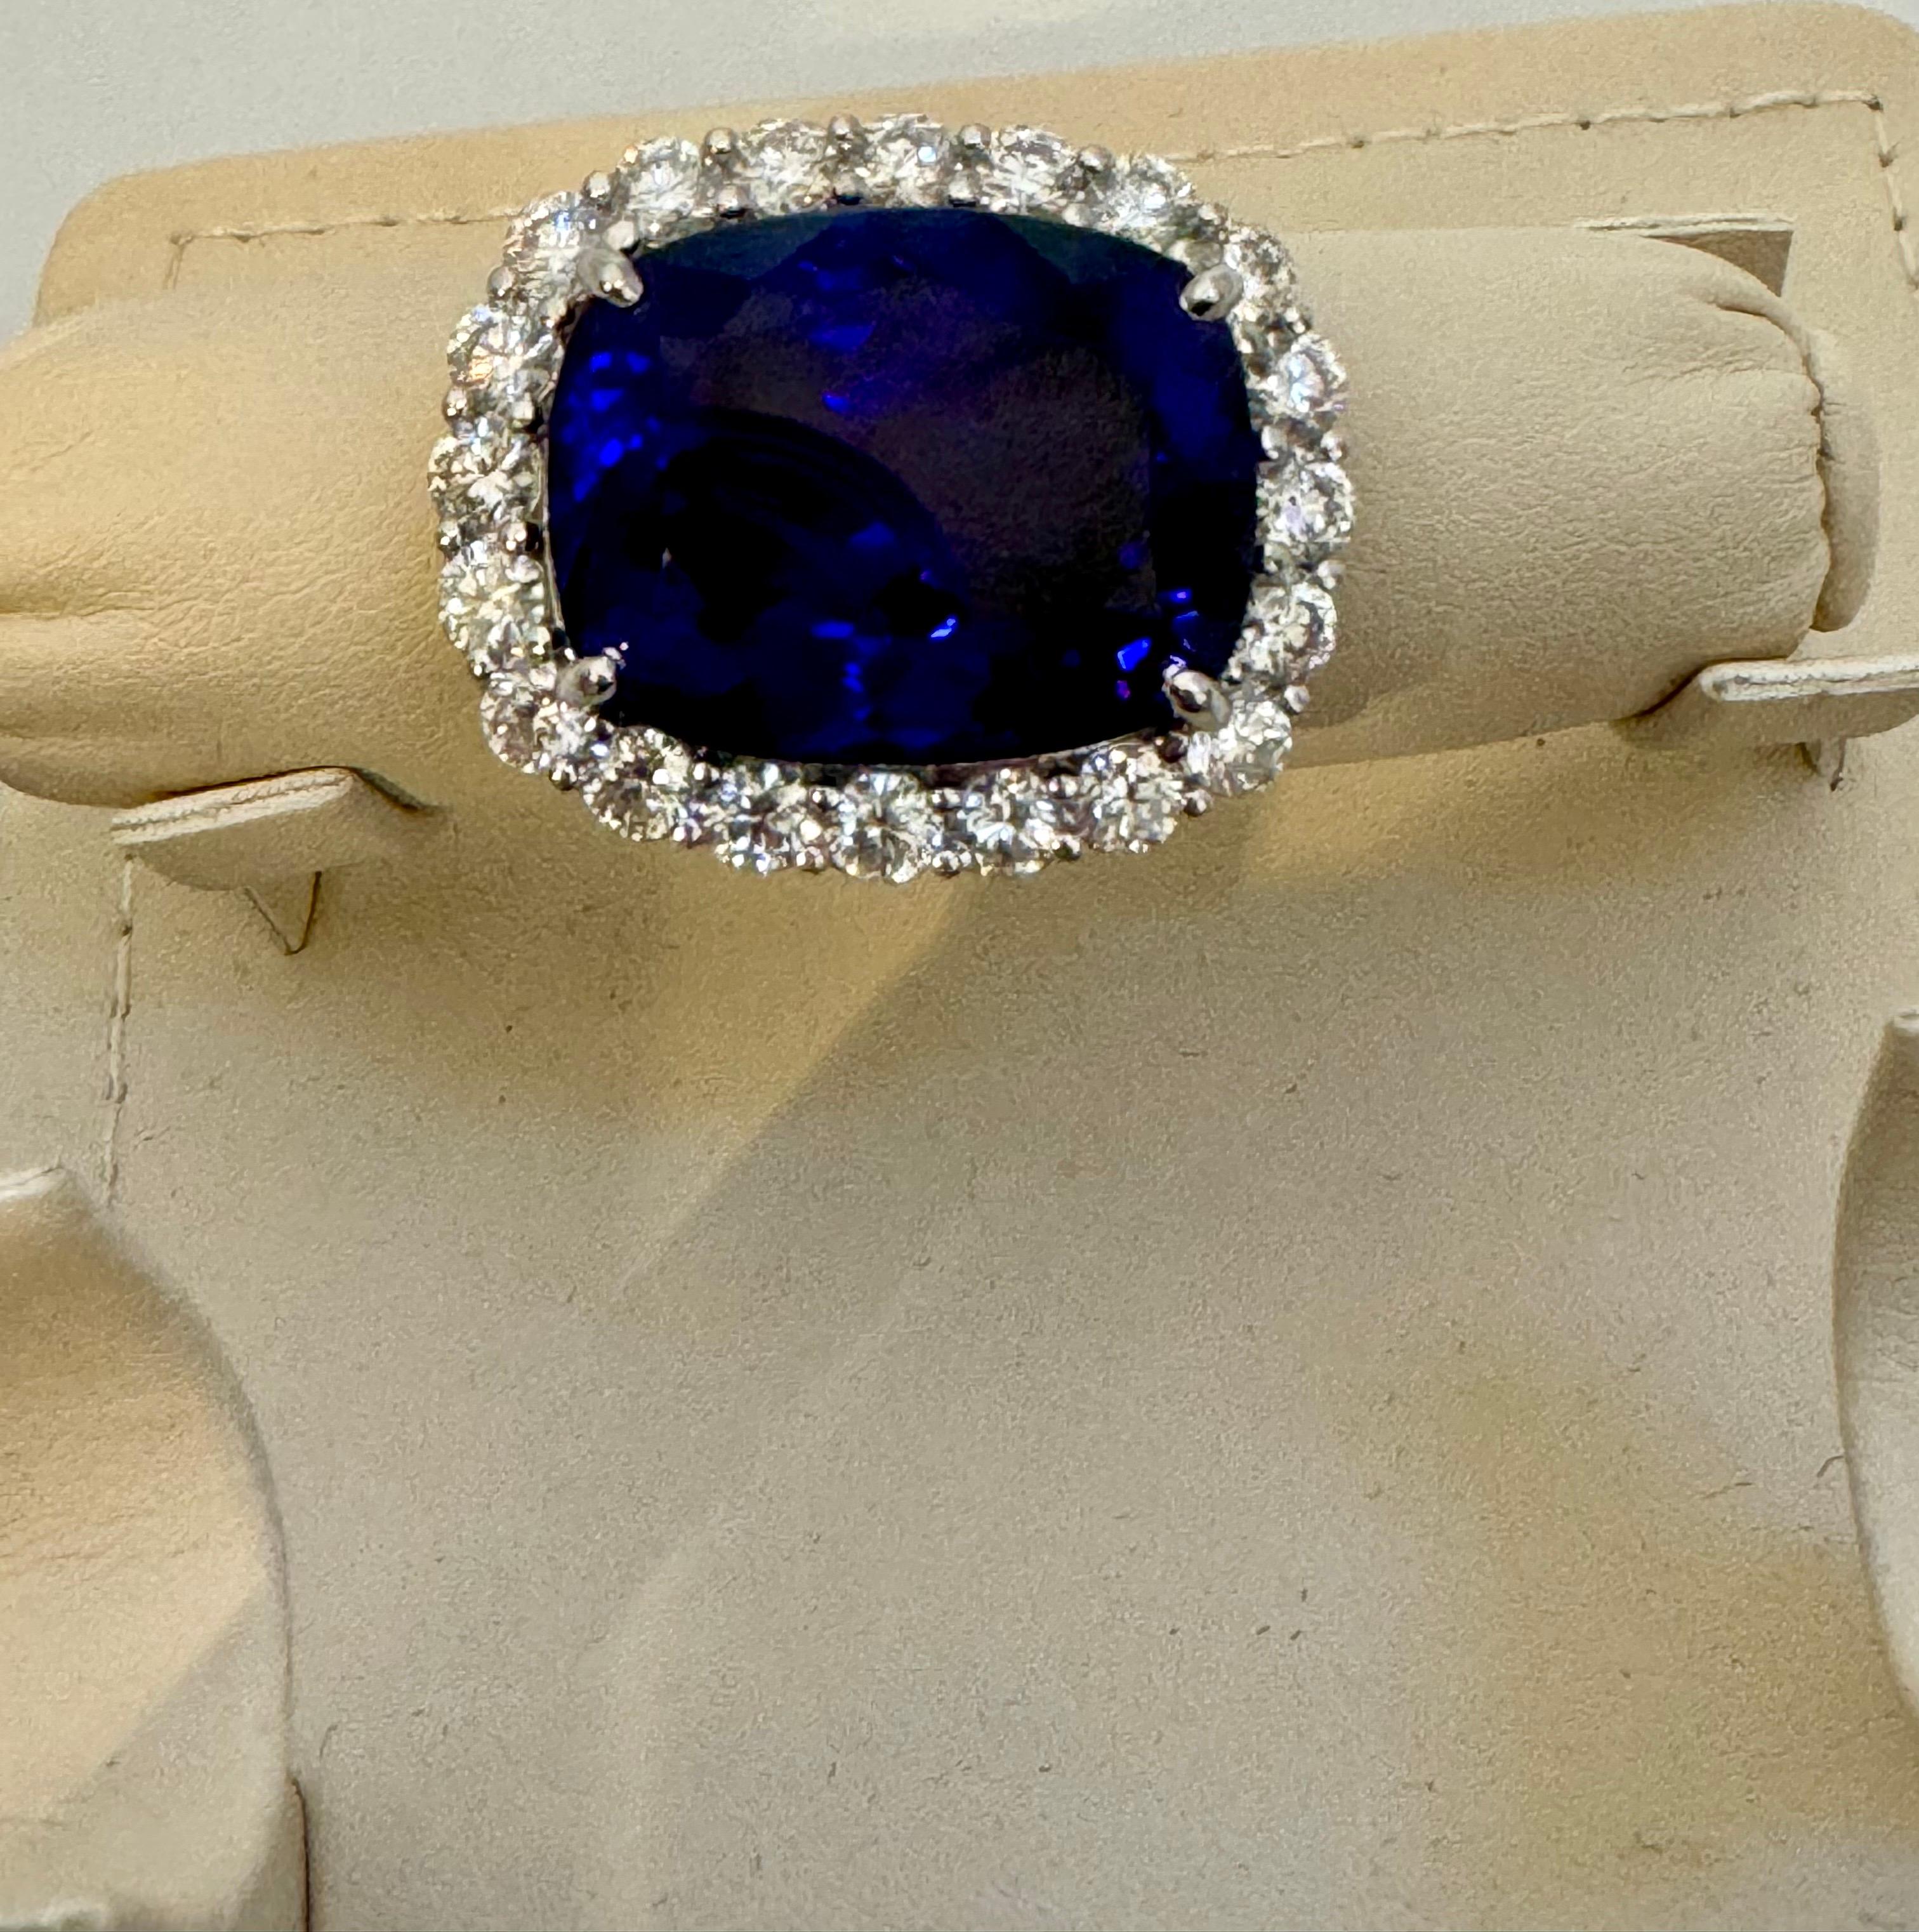 Extreme fine color and clarity.
This extraordinary, 43.74 carat tanzanite is truly an extraordinary gemstone. There are  total  of 4 carats of shimmering white brilliant cut round diamonds, this brilliant cushion-cut gem exhibits the rich